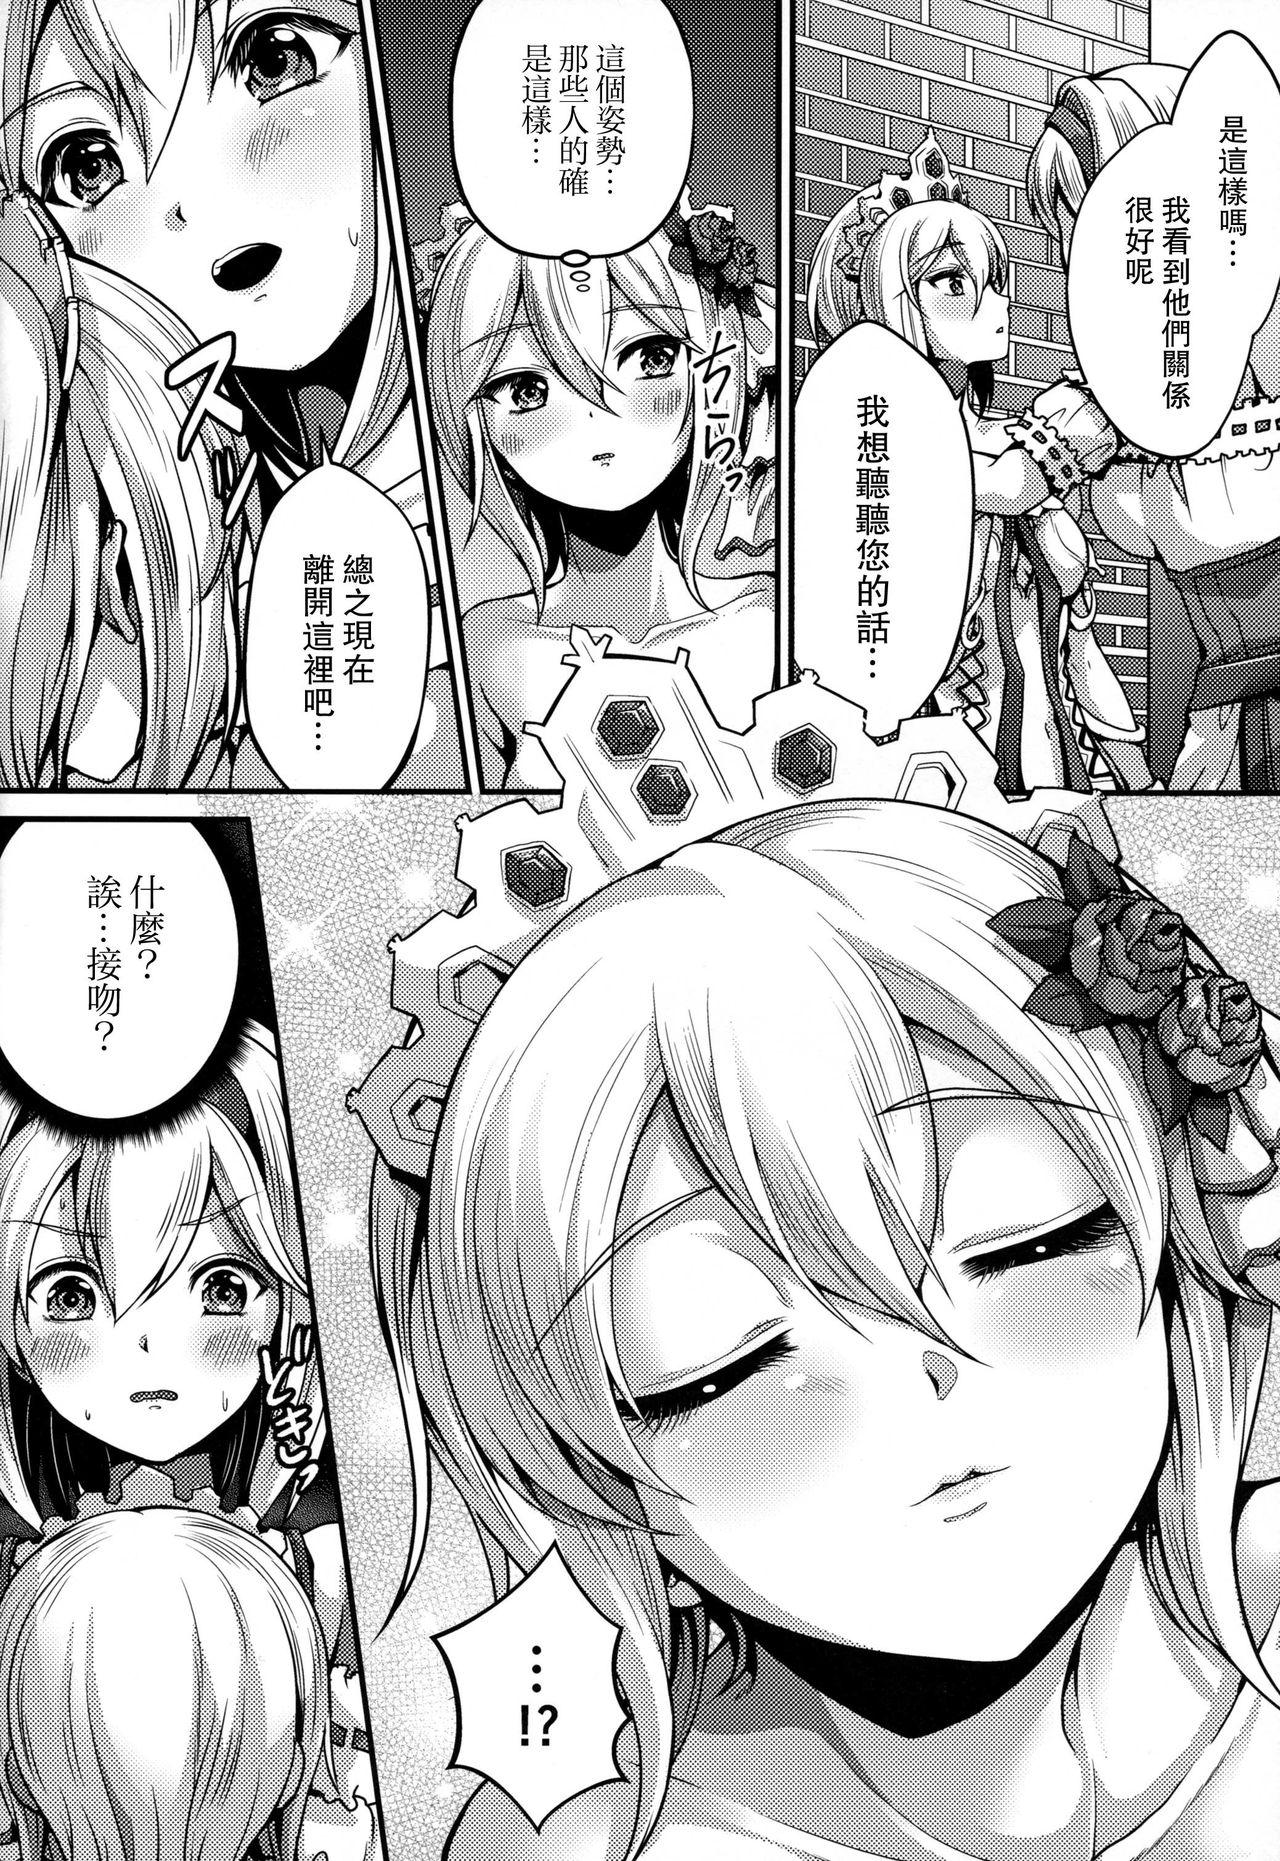 Hairypussy Princess is Seeking Unknown - Granblue fantasy Pattaya - Page 5